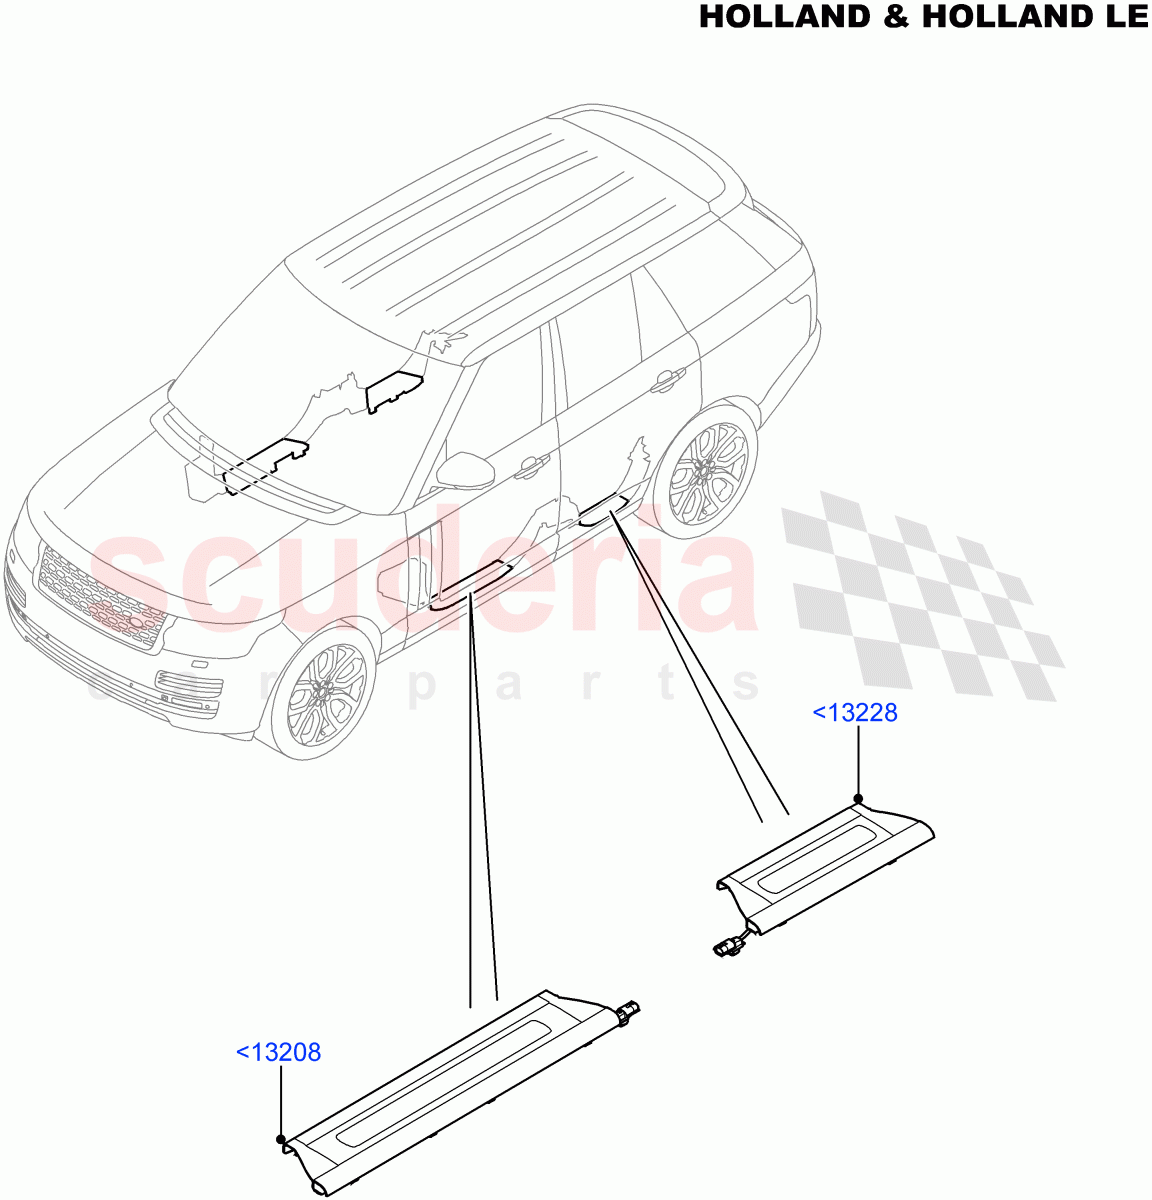 Side Trim(Holland & Holland LE, Sill)(Console Deployable Tables)((V)FROMFA000001) of Land Rover Land Rover Range Rover (2012-2021) [3.0 DOHC GDI SC V6 Petrol]